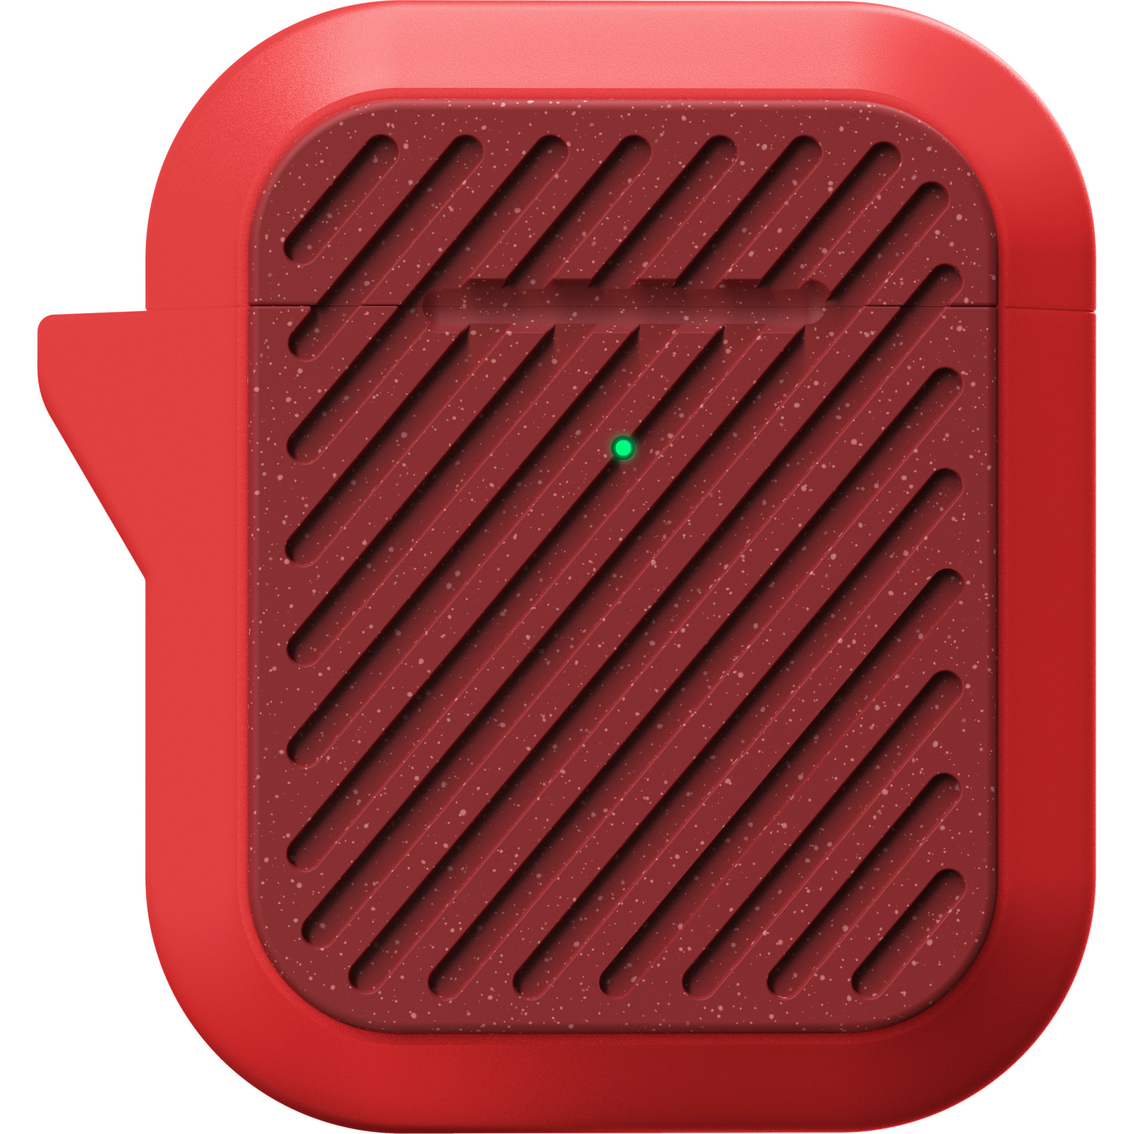 Laut Capsule IMPKT Case for Apple AirPods - Image 4 of 6